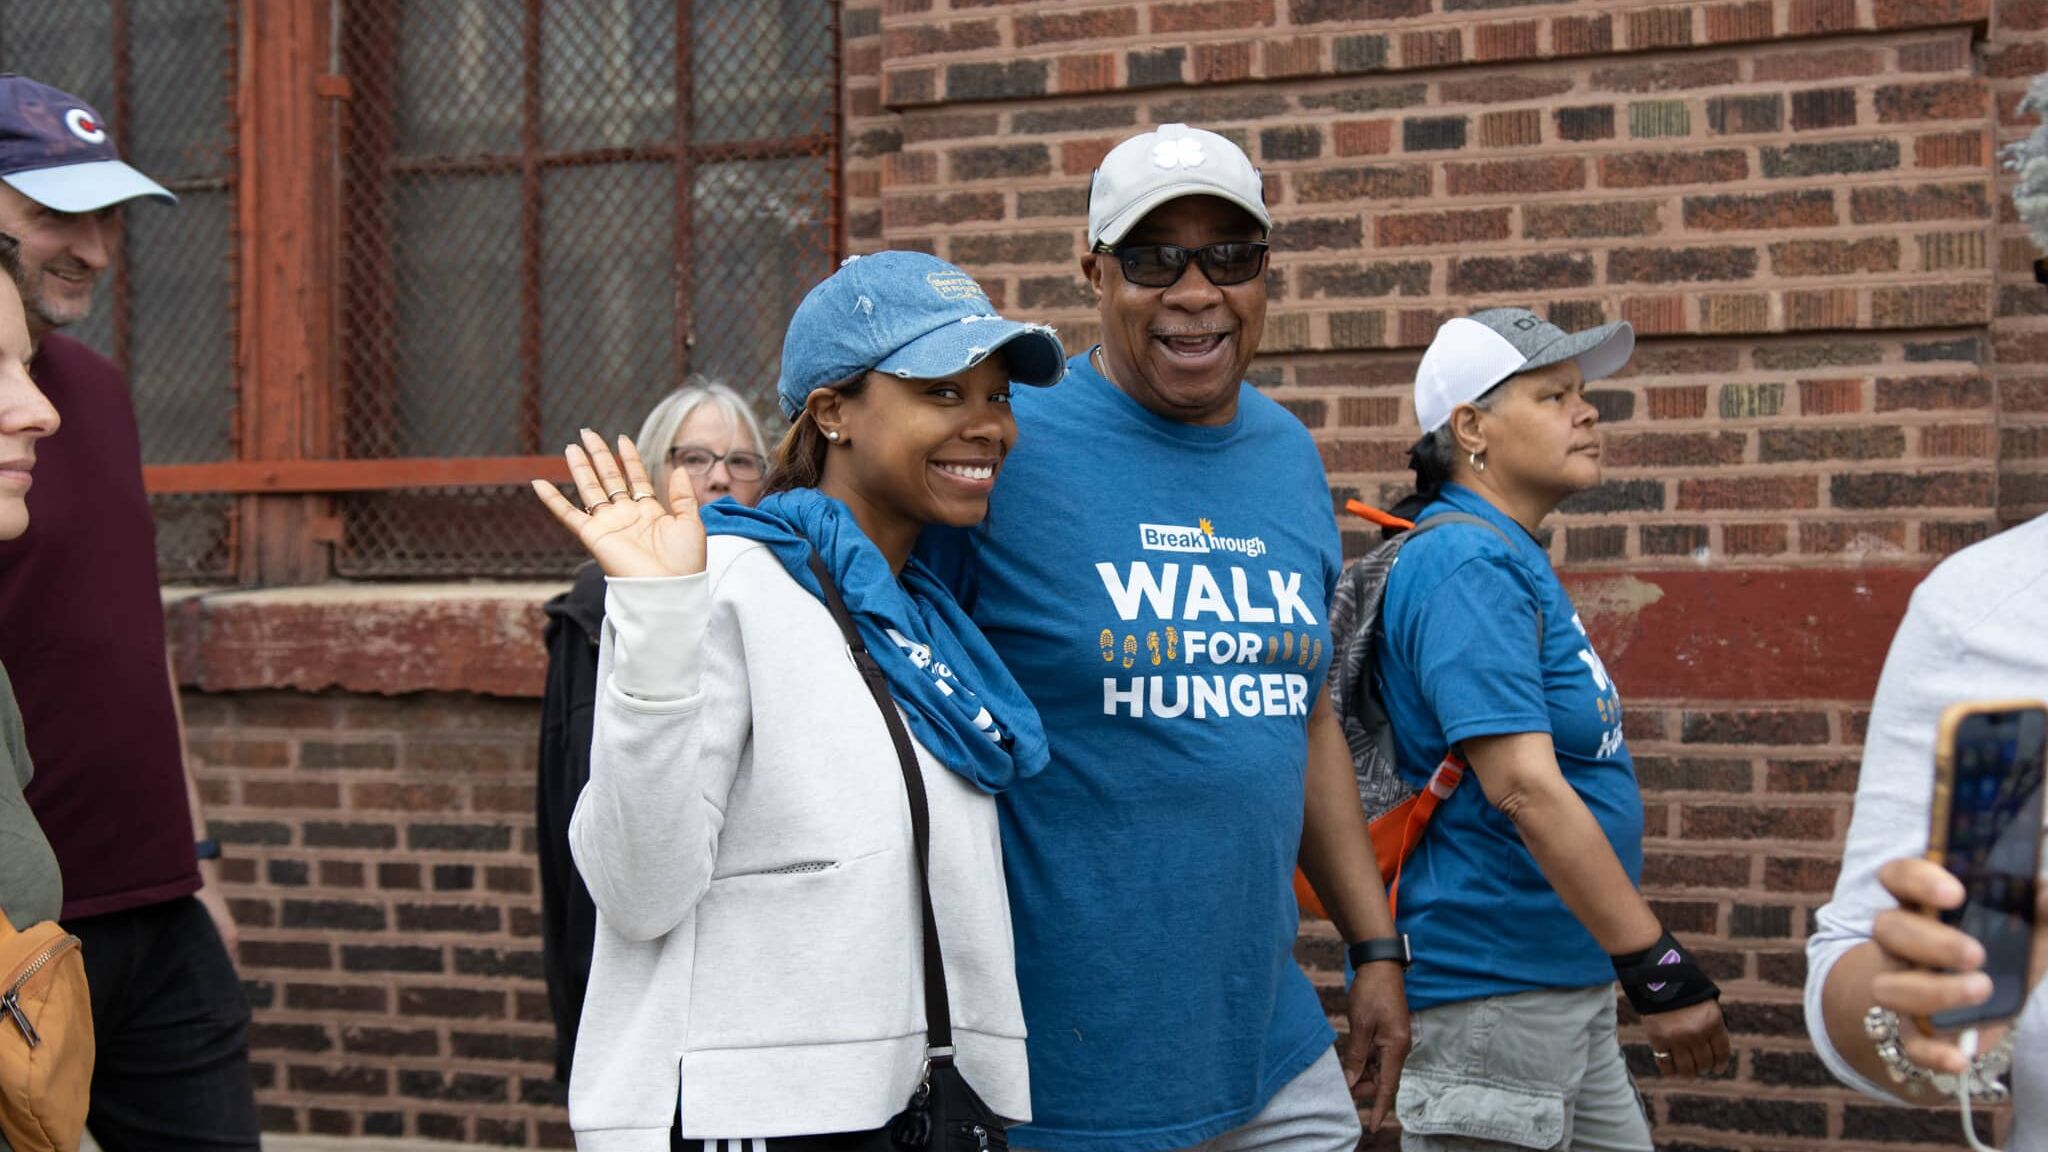 More Than 600 People Participate in Walk for Hunger 24